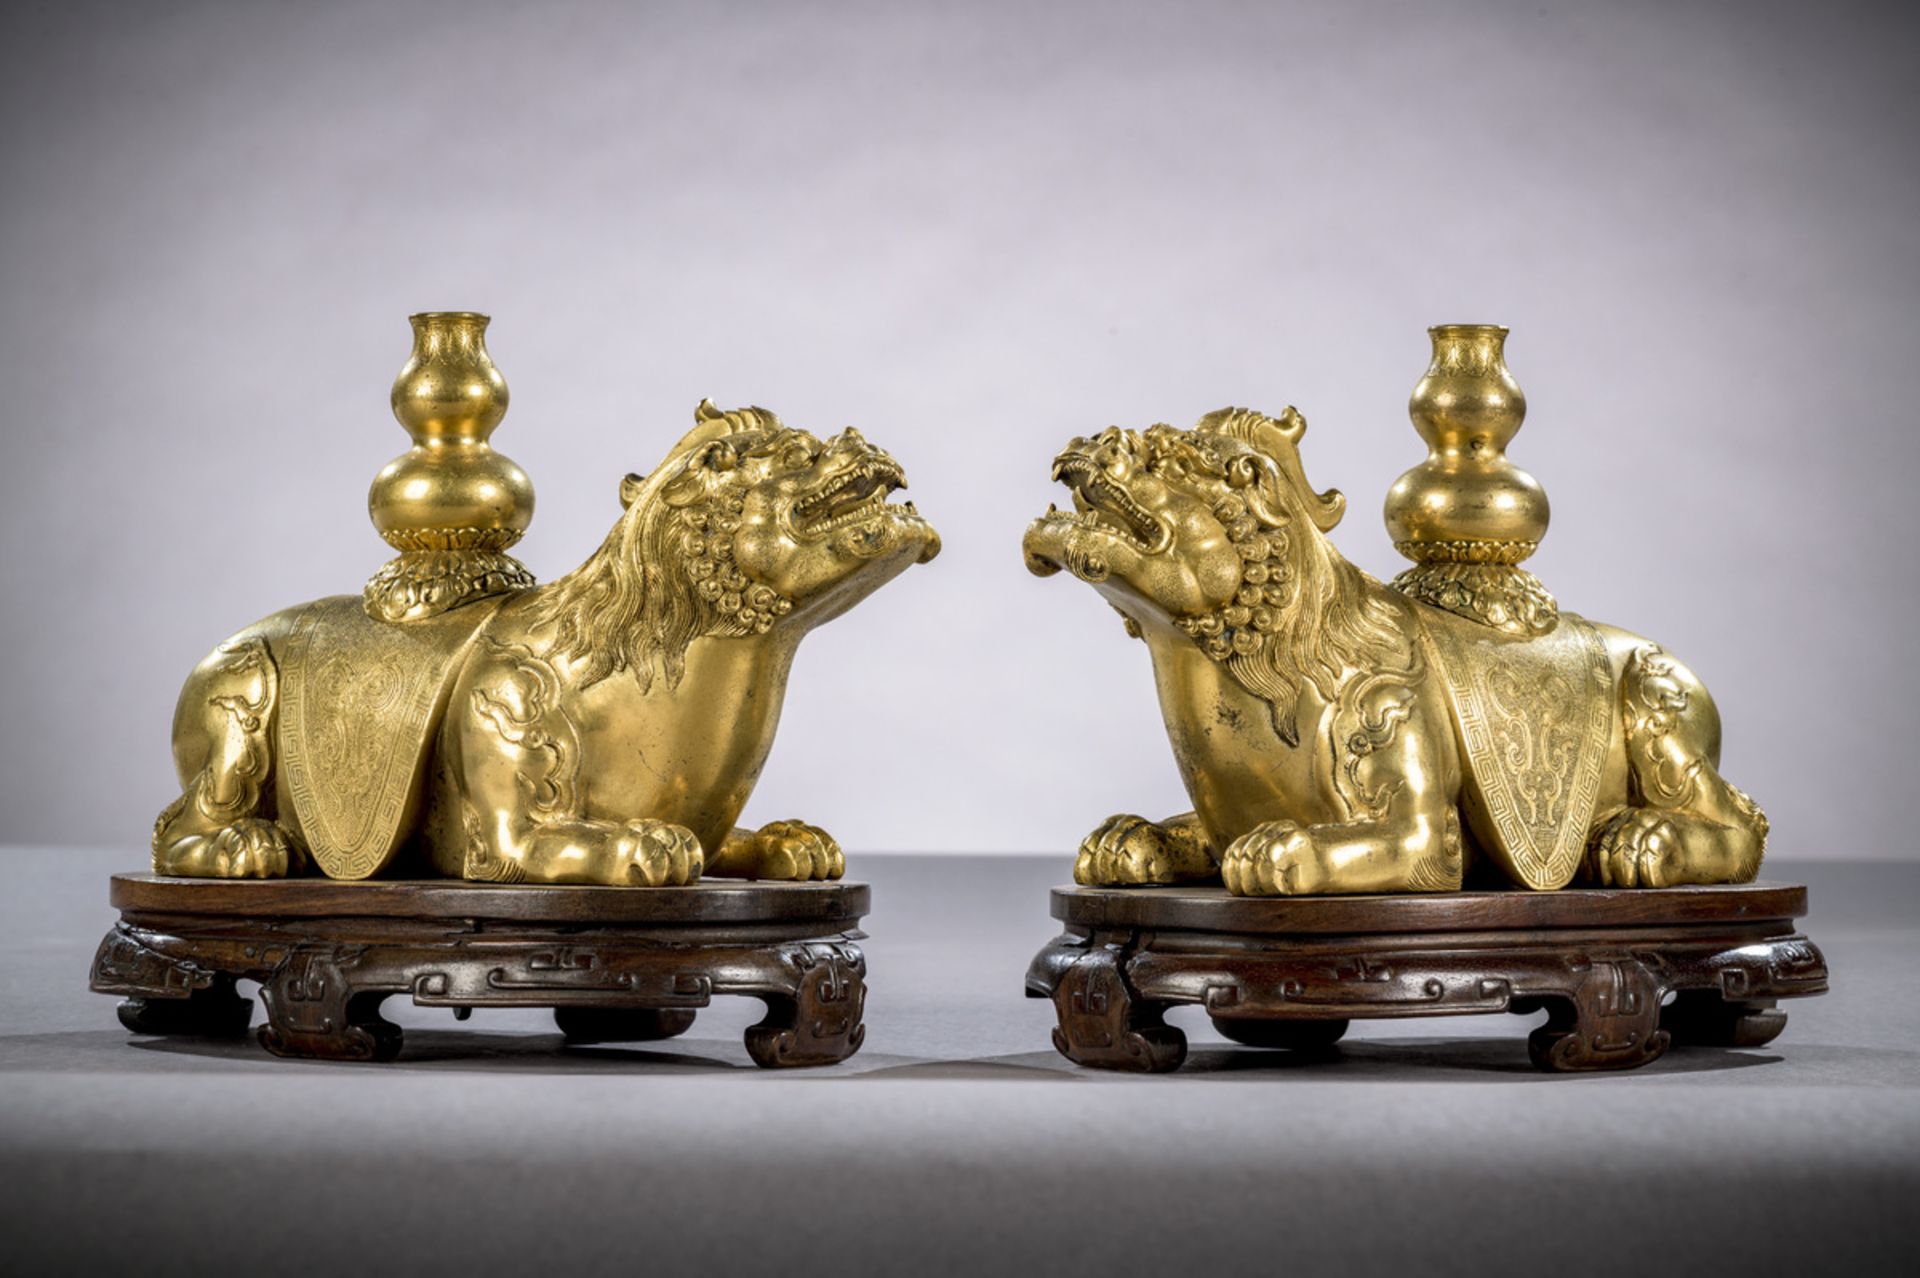 A fine pair of gilt bronze mythical lions on hardwood stands, China Qing dynasty (14.5 x 22.5 x 10